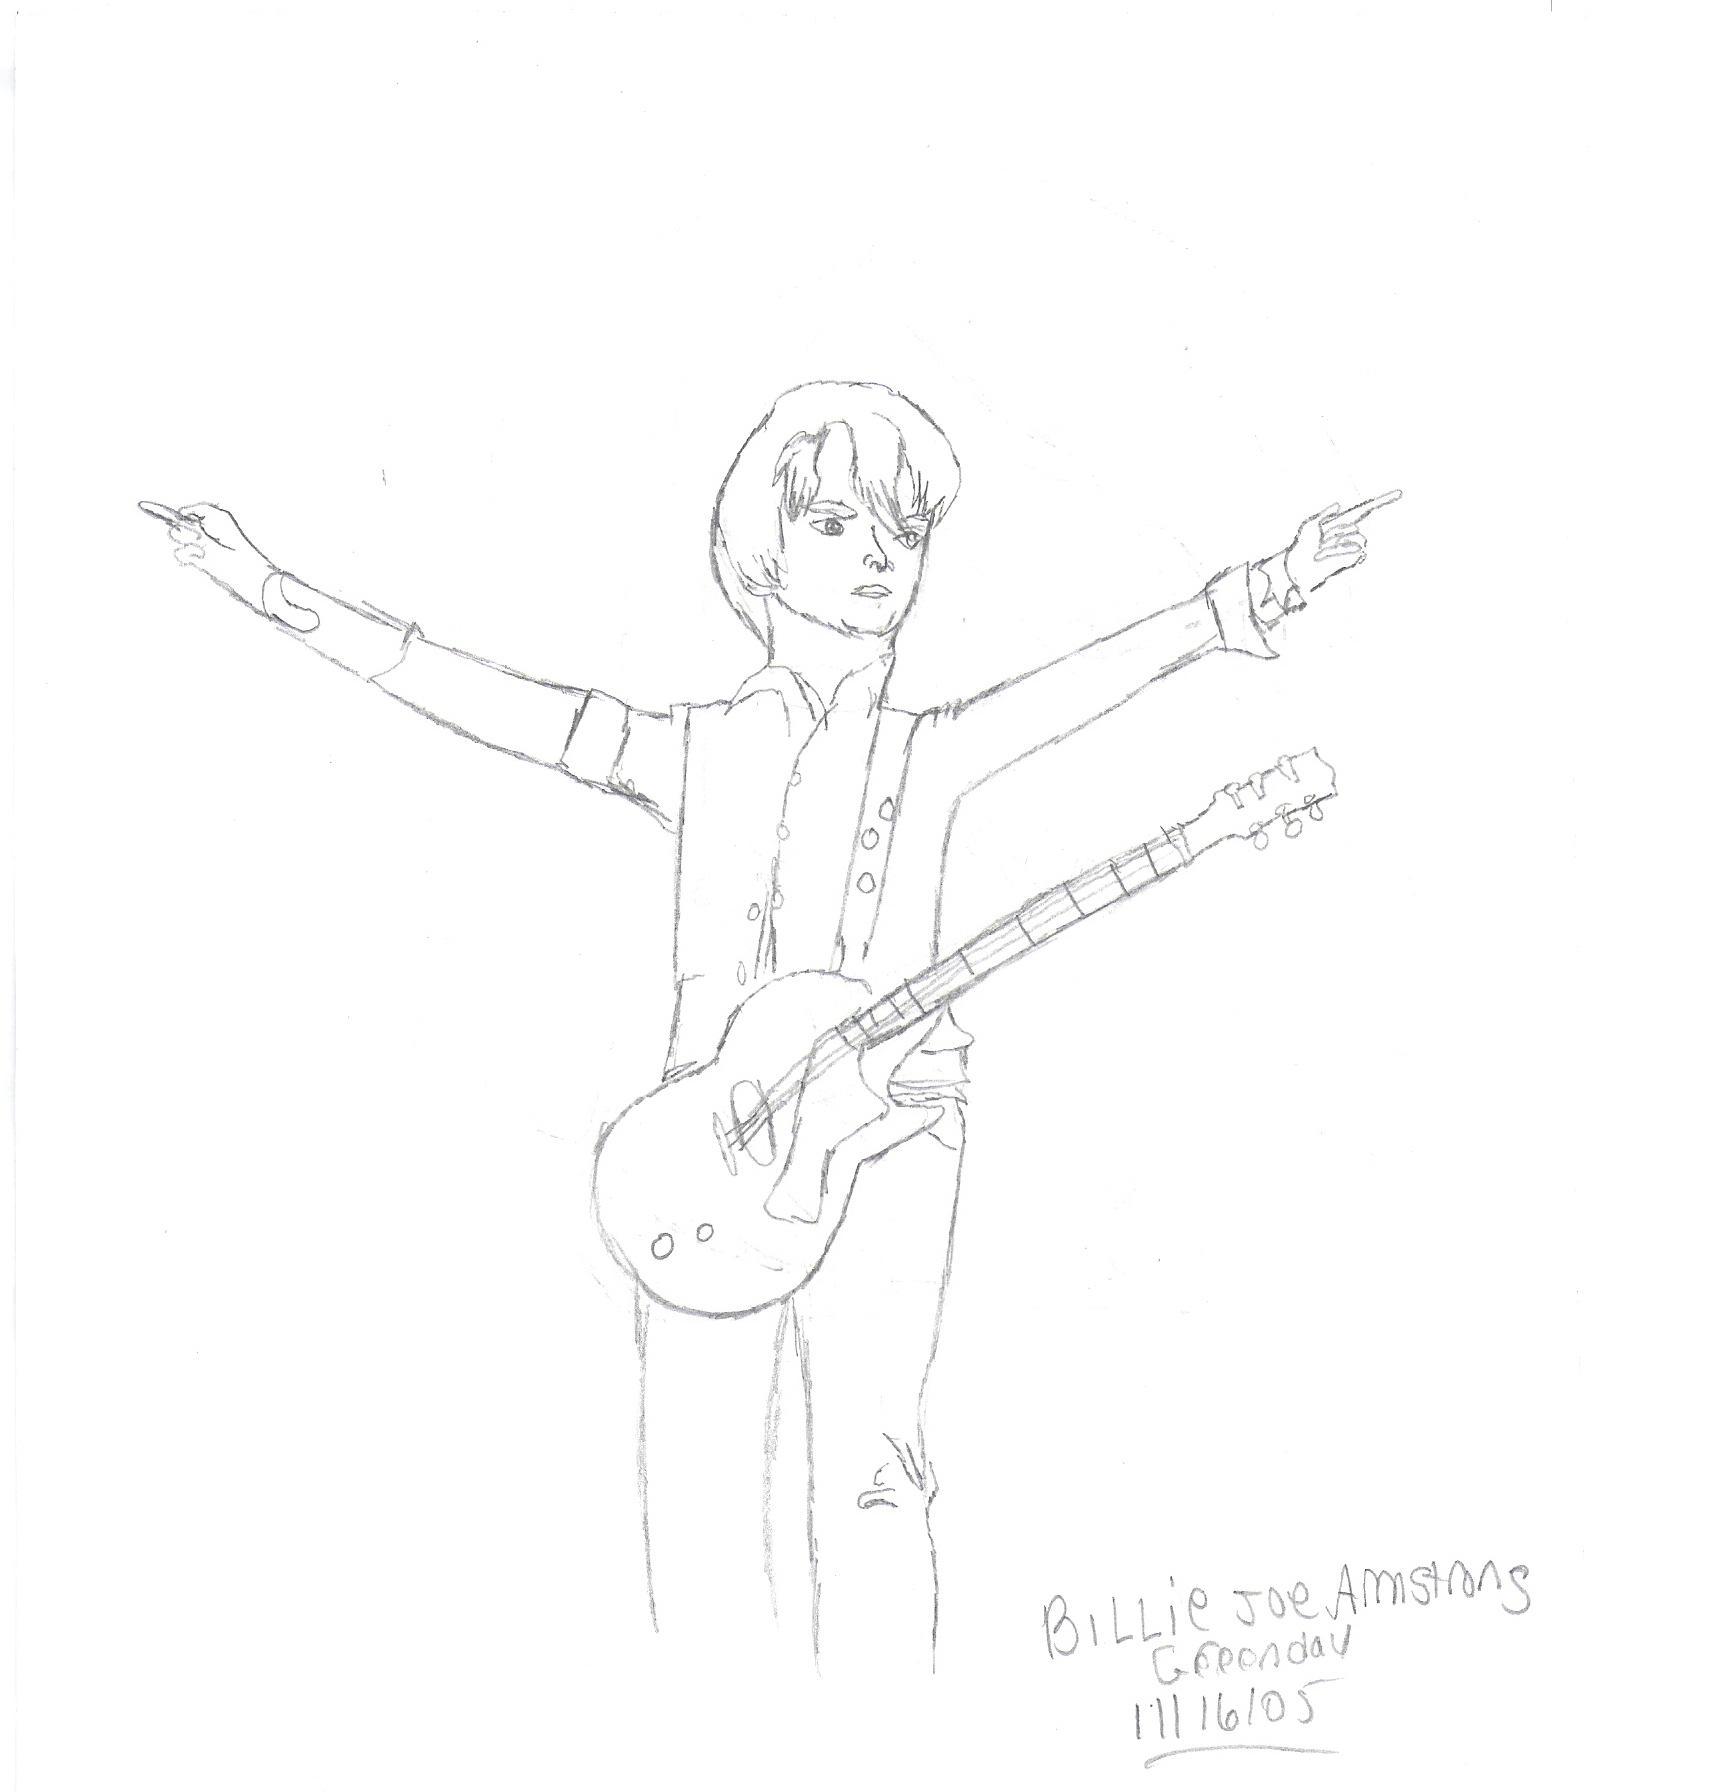 Bille Joe Armstrong by Gerardthedevil